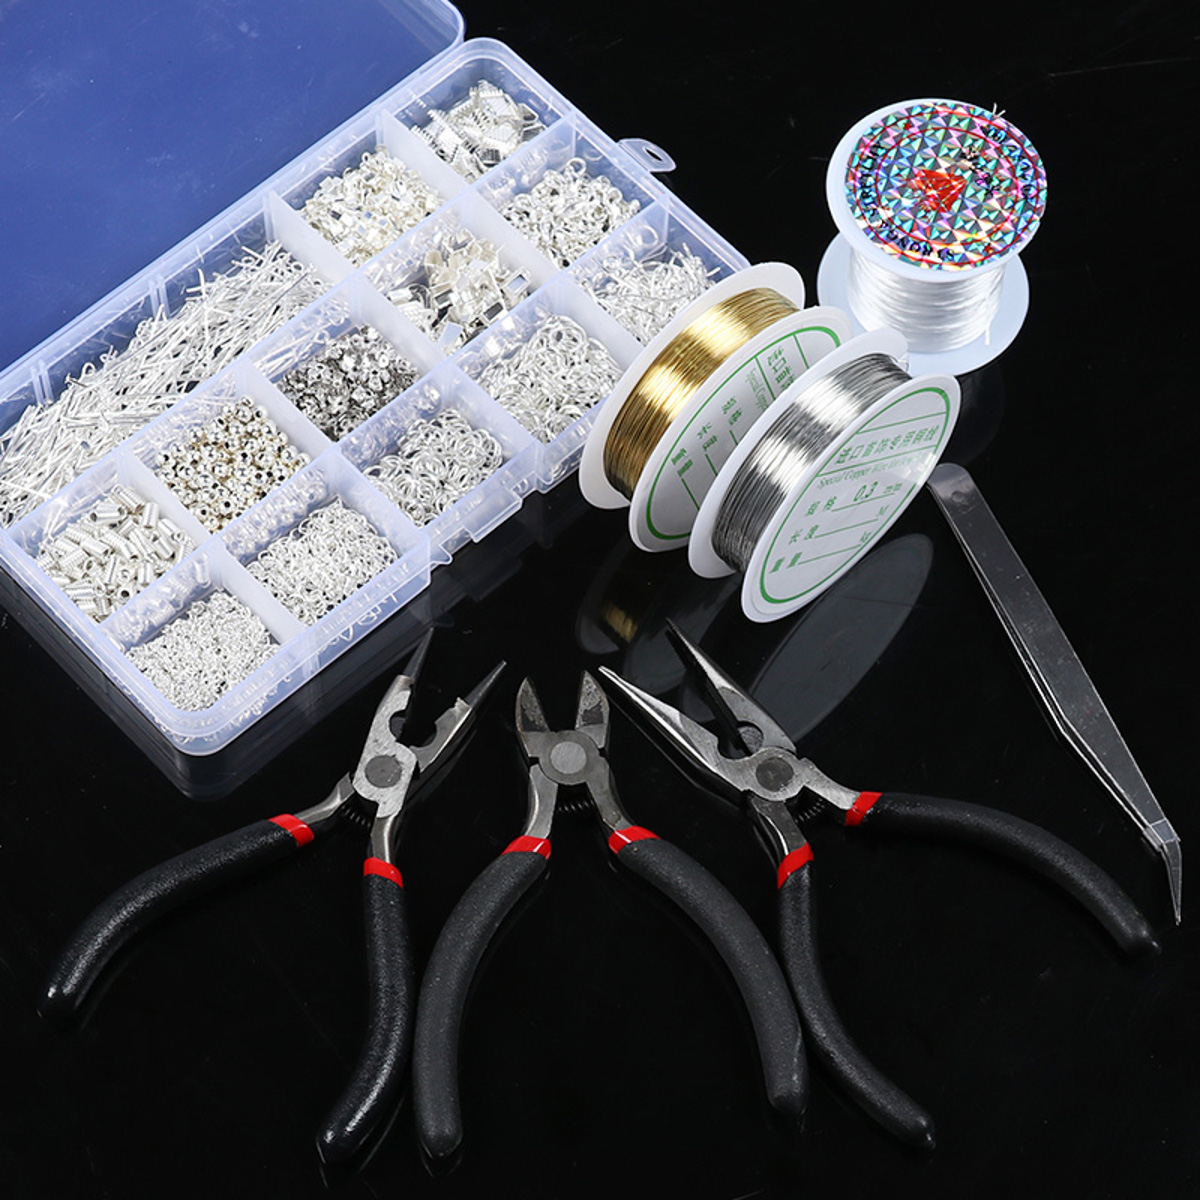 Jewelry-Making-Wire-Starter-Threads-Findings-Pliers-Repair-Tool-Craft-Supply-Kit-1693573-4